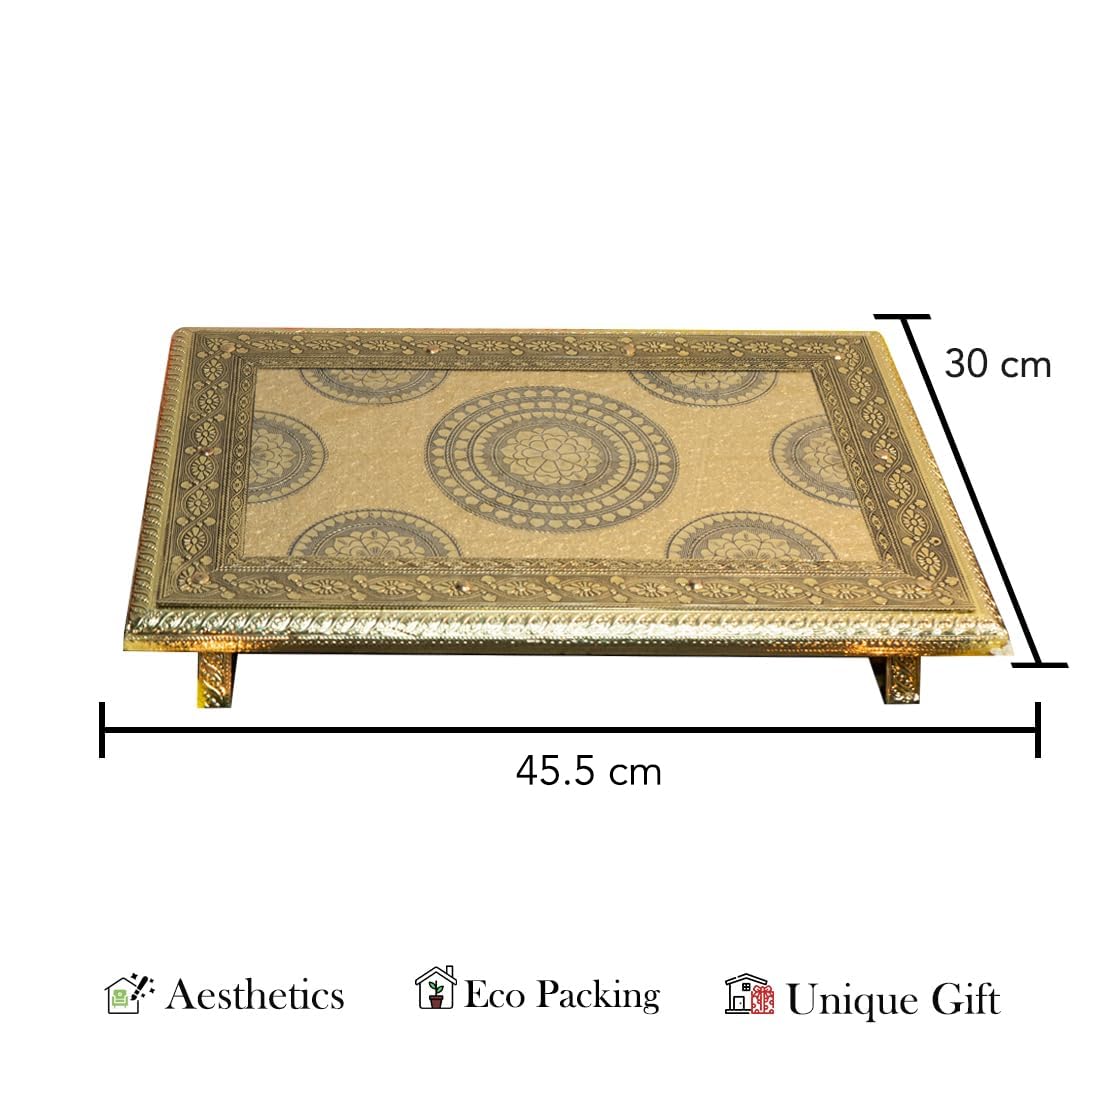 Ekhasa Wooden Chowki for Puja with Brass Sheet (18 * 12 Inch)|Rectangular Ideal Pooja Table for Home|Bajot for God Idols|Diwali Decorations Items for Home|Wooden Chowki for Sitting